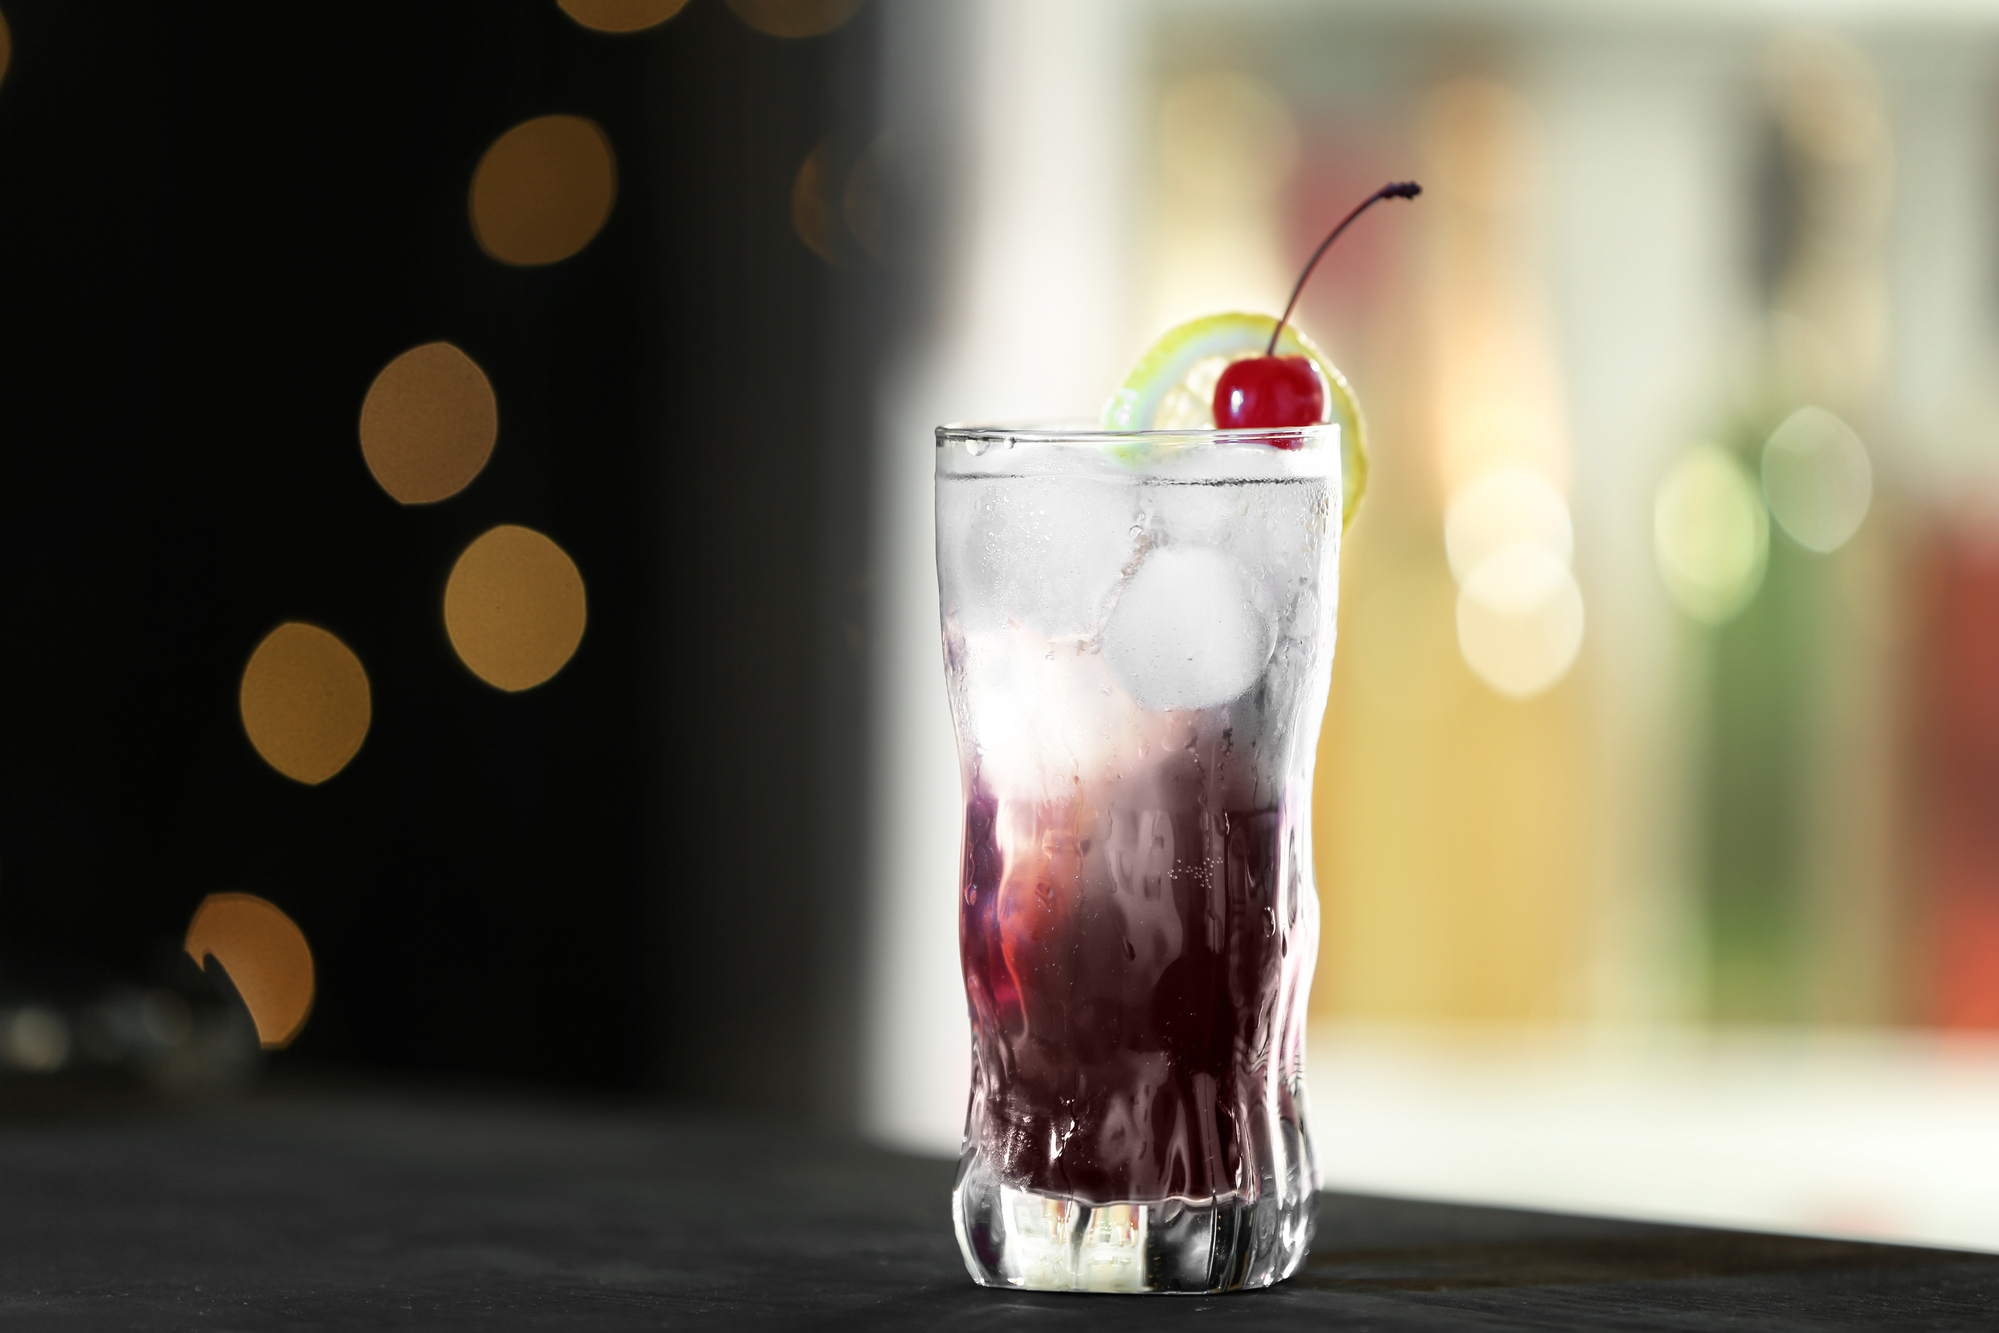 Black superman drink in a glass decorated with cherry placed on a black surface